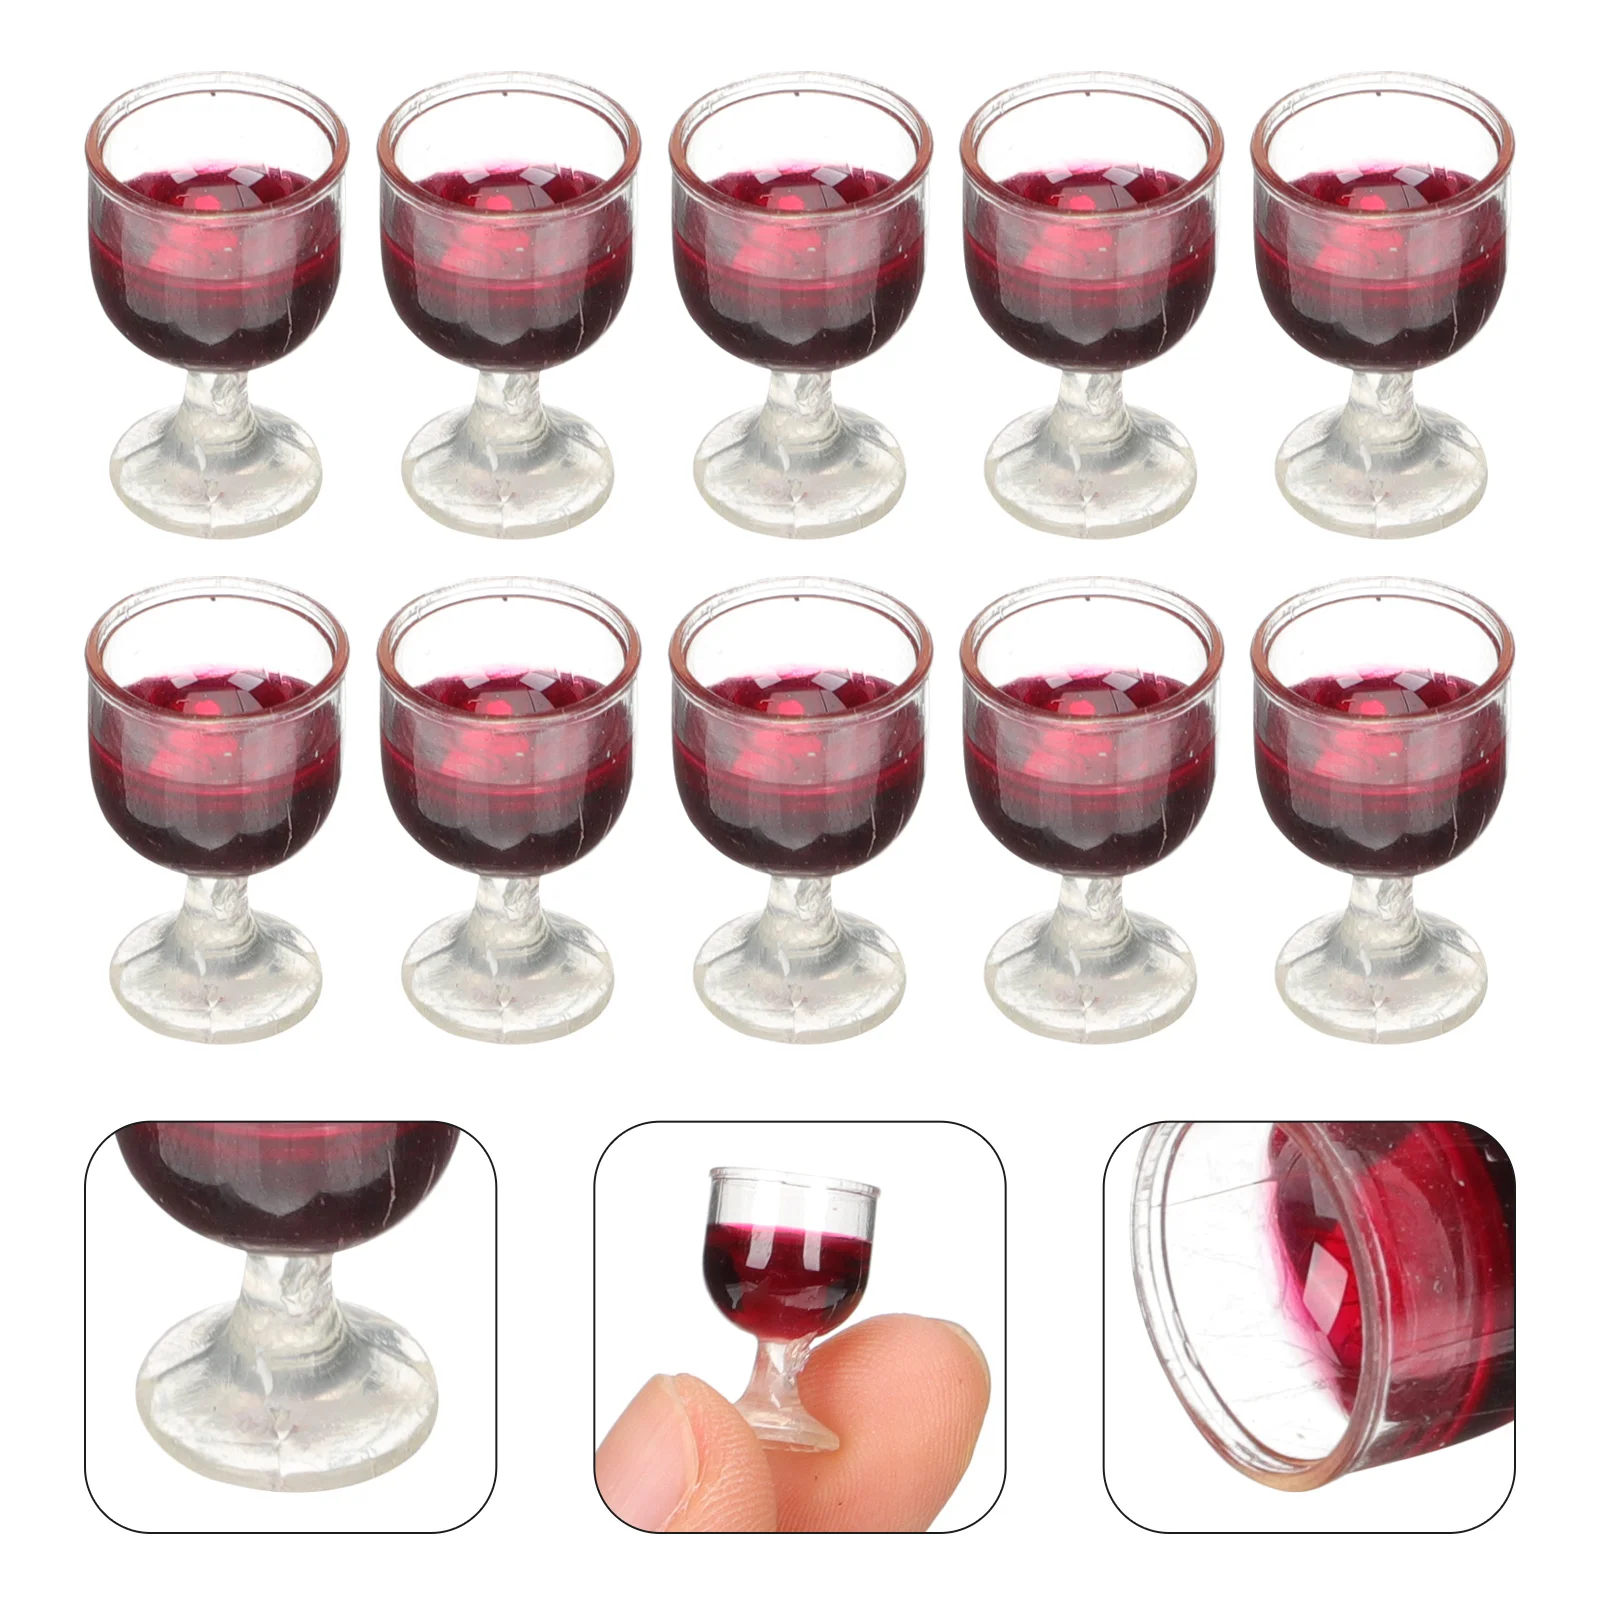 10 Pcs Glassess Dollhouse Glass Miniature Decoration Accessories Micro Food Play Props Decorative Tiny Dolly Glasses tooarts glass set stack glasses fish shaped cup cocktail glass desktop decoration wedding furnishings housewarming gift three color